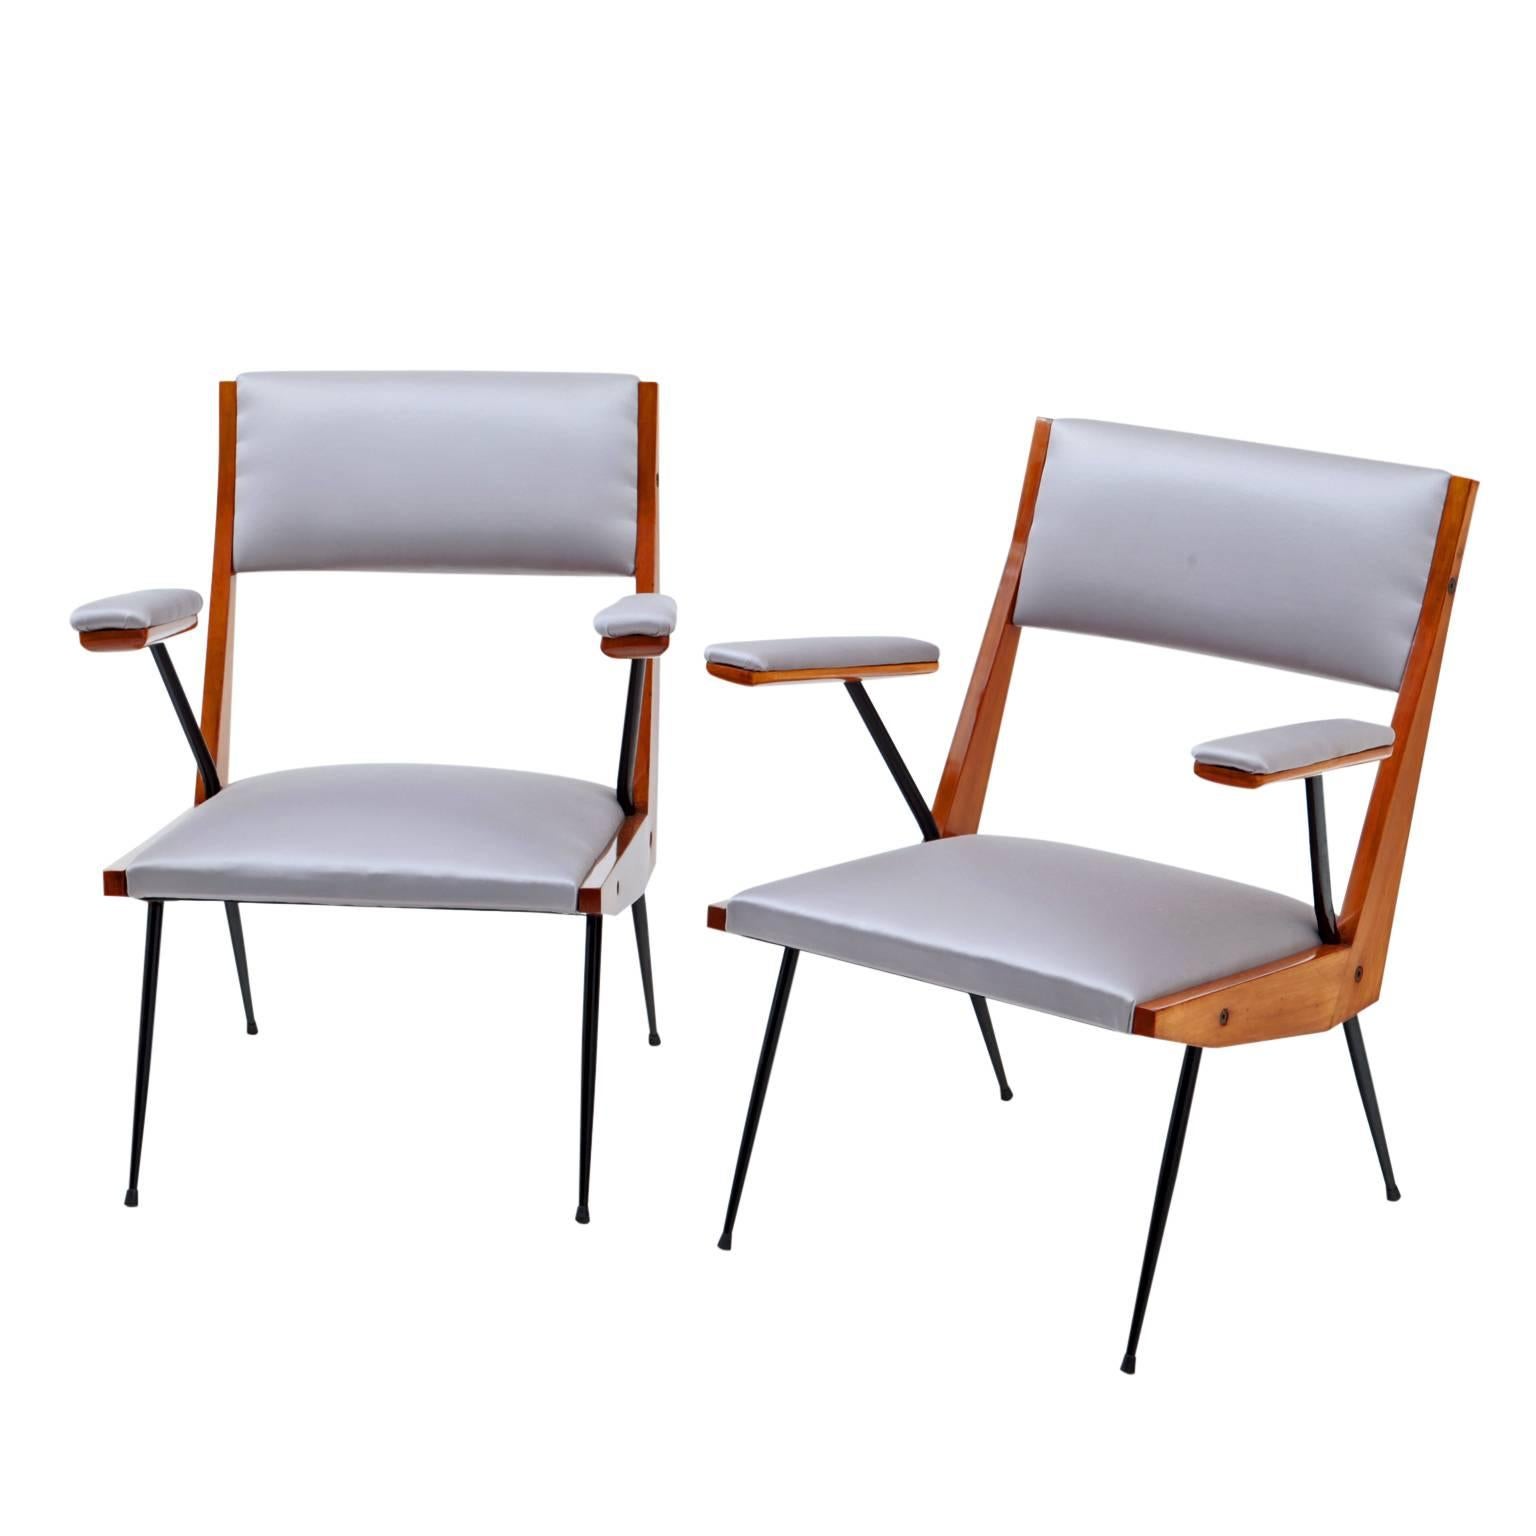 Pair of Armchairs, Mid-20th Century